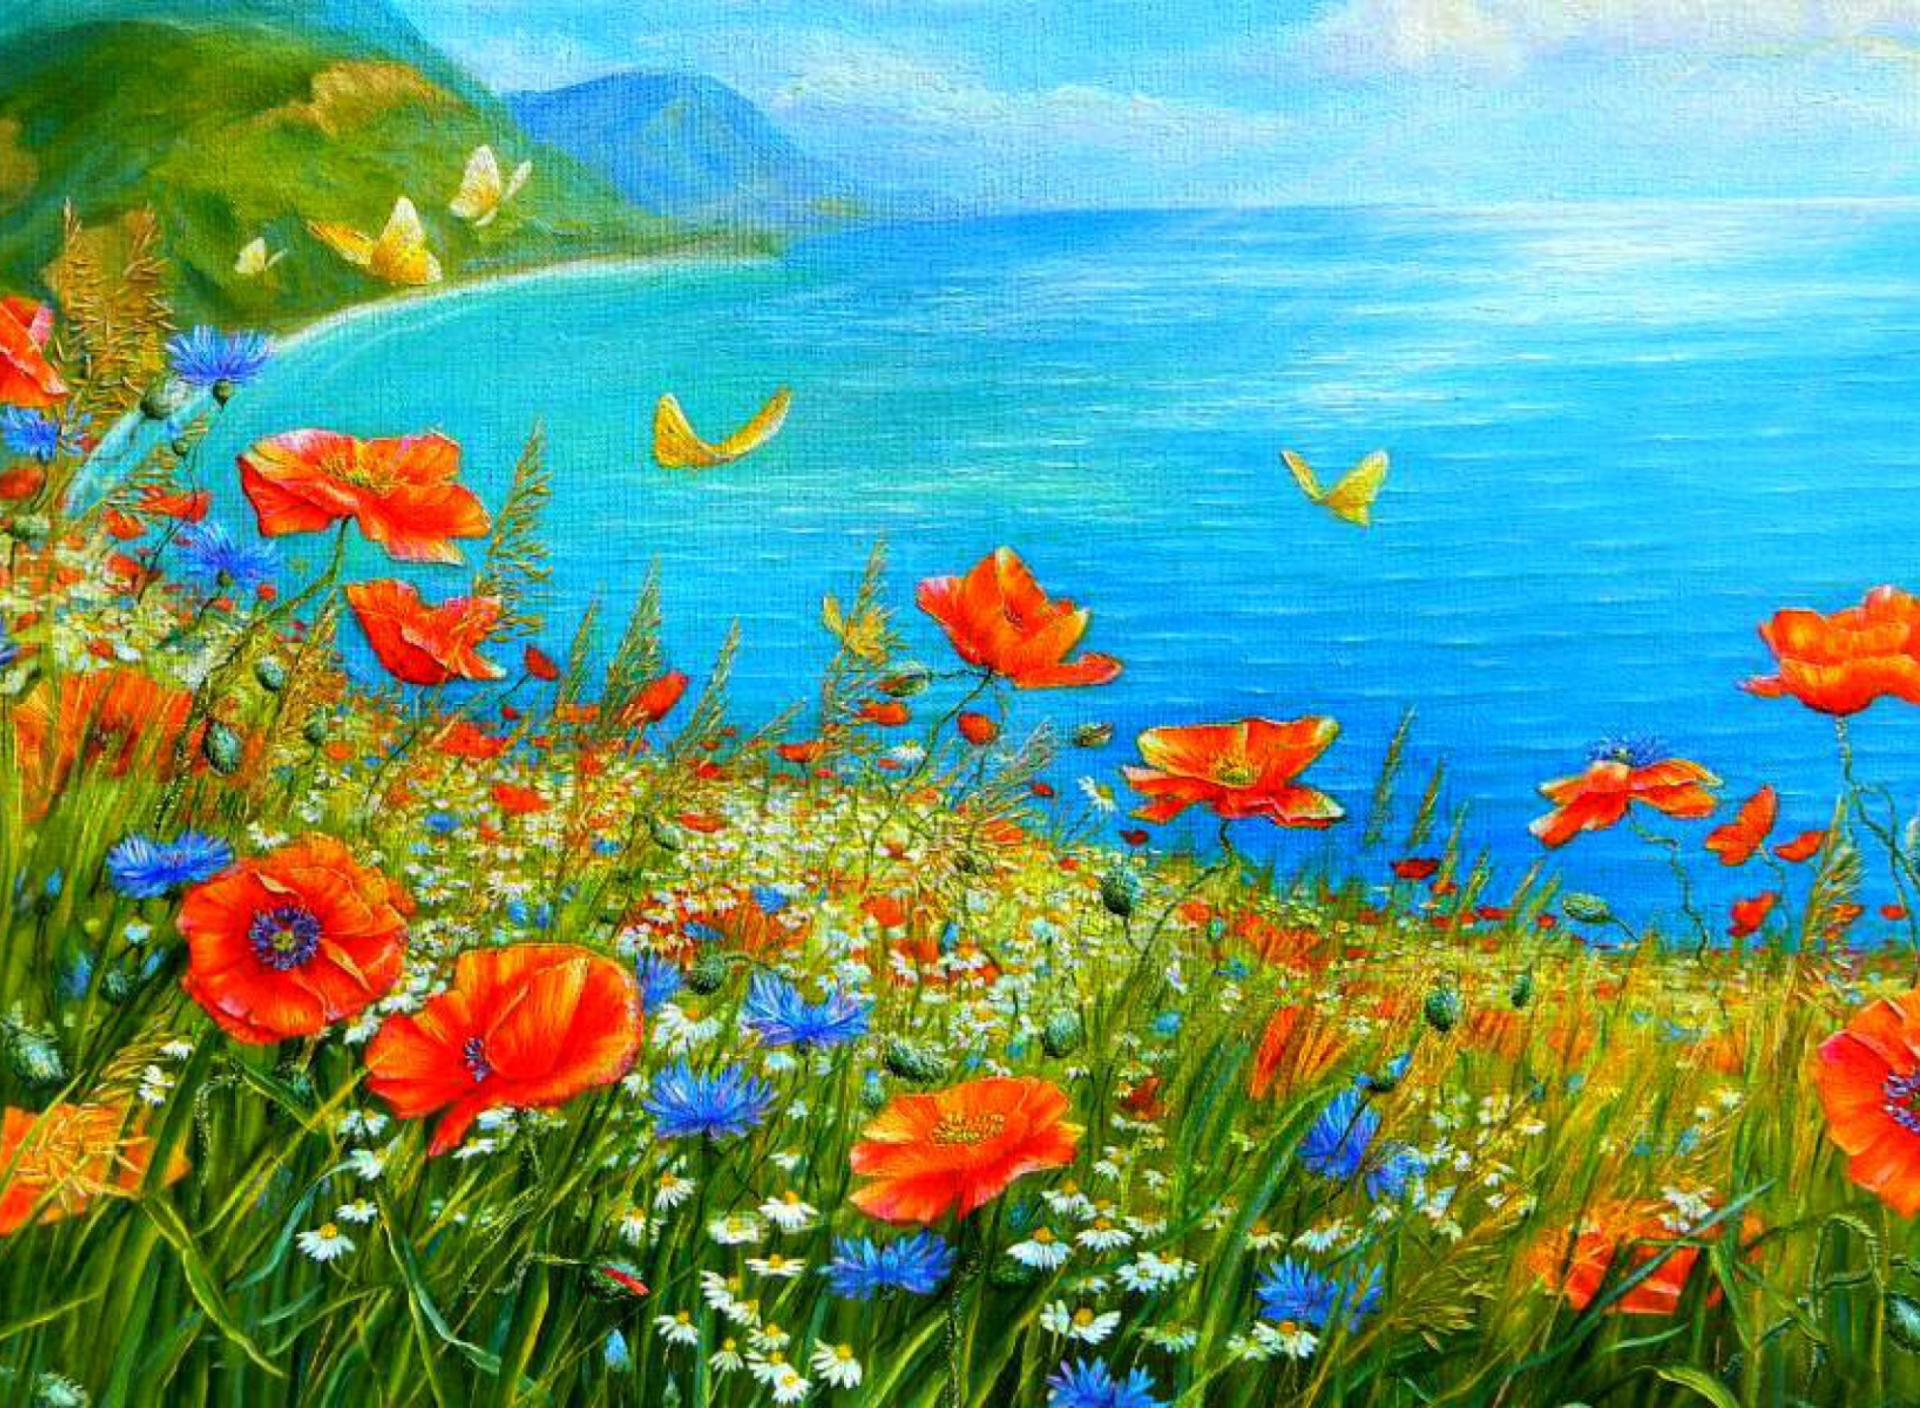 Das Summer Meadow By Sea Painting Wallpaper 1920x1408